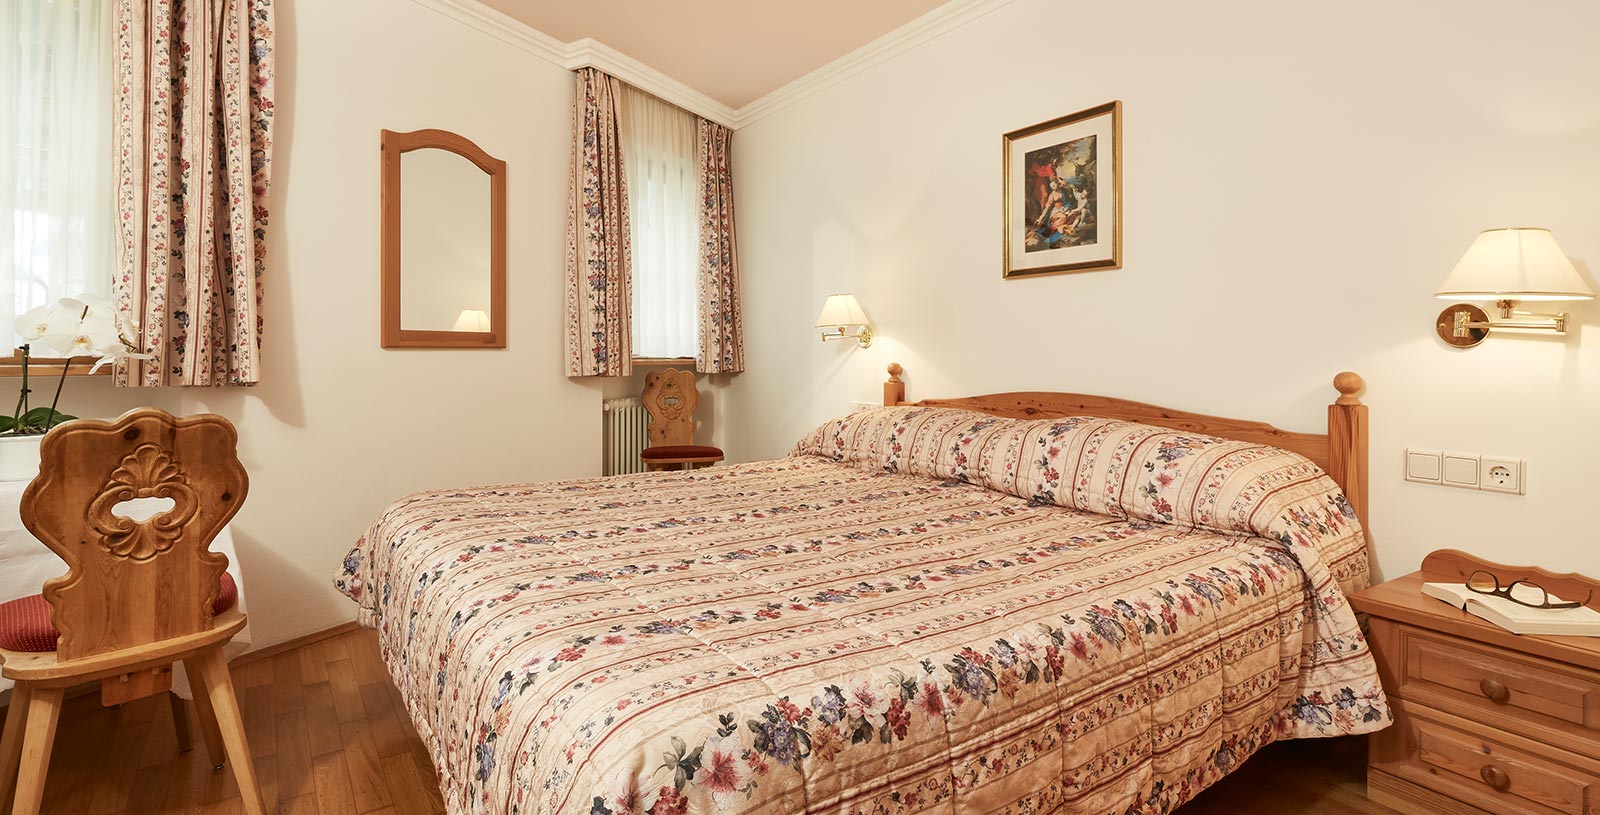 the kingsize bed of a vacation home in Corvara, curtains and bed linen wear the same flower motif